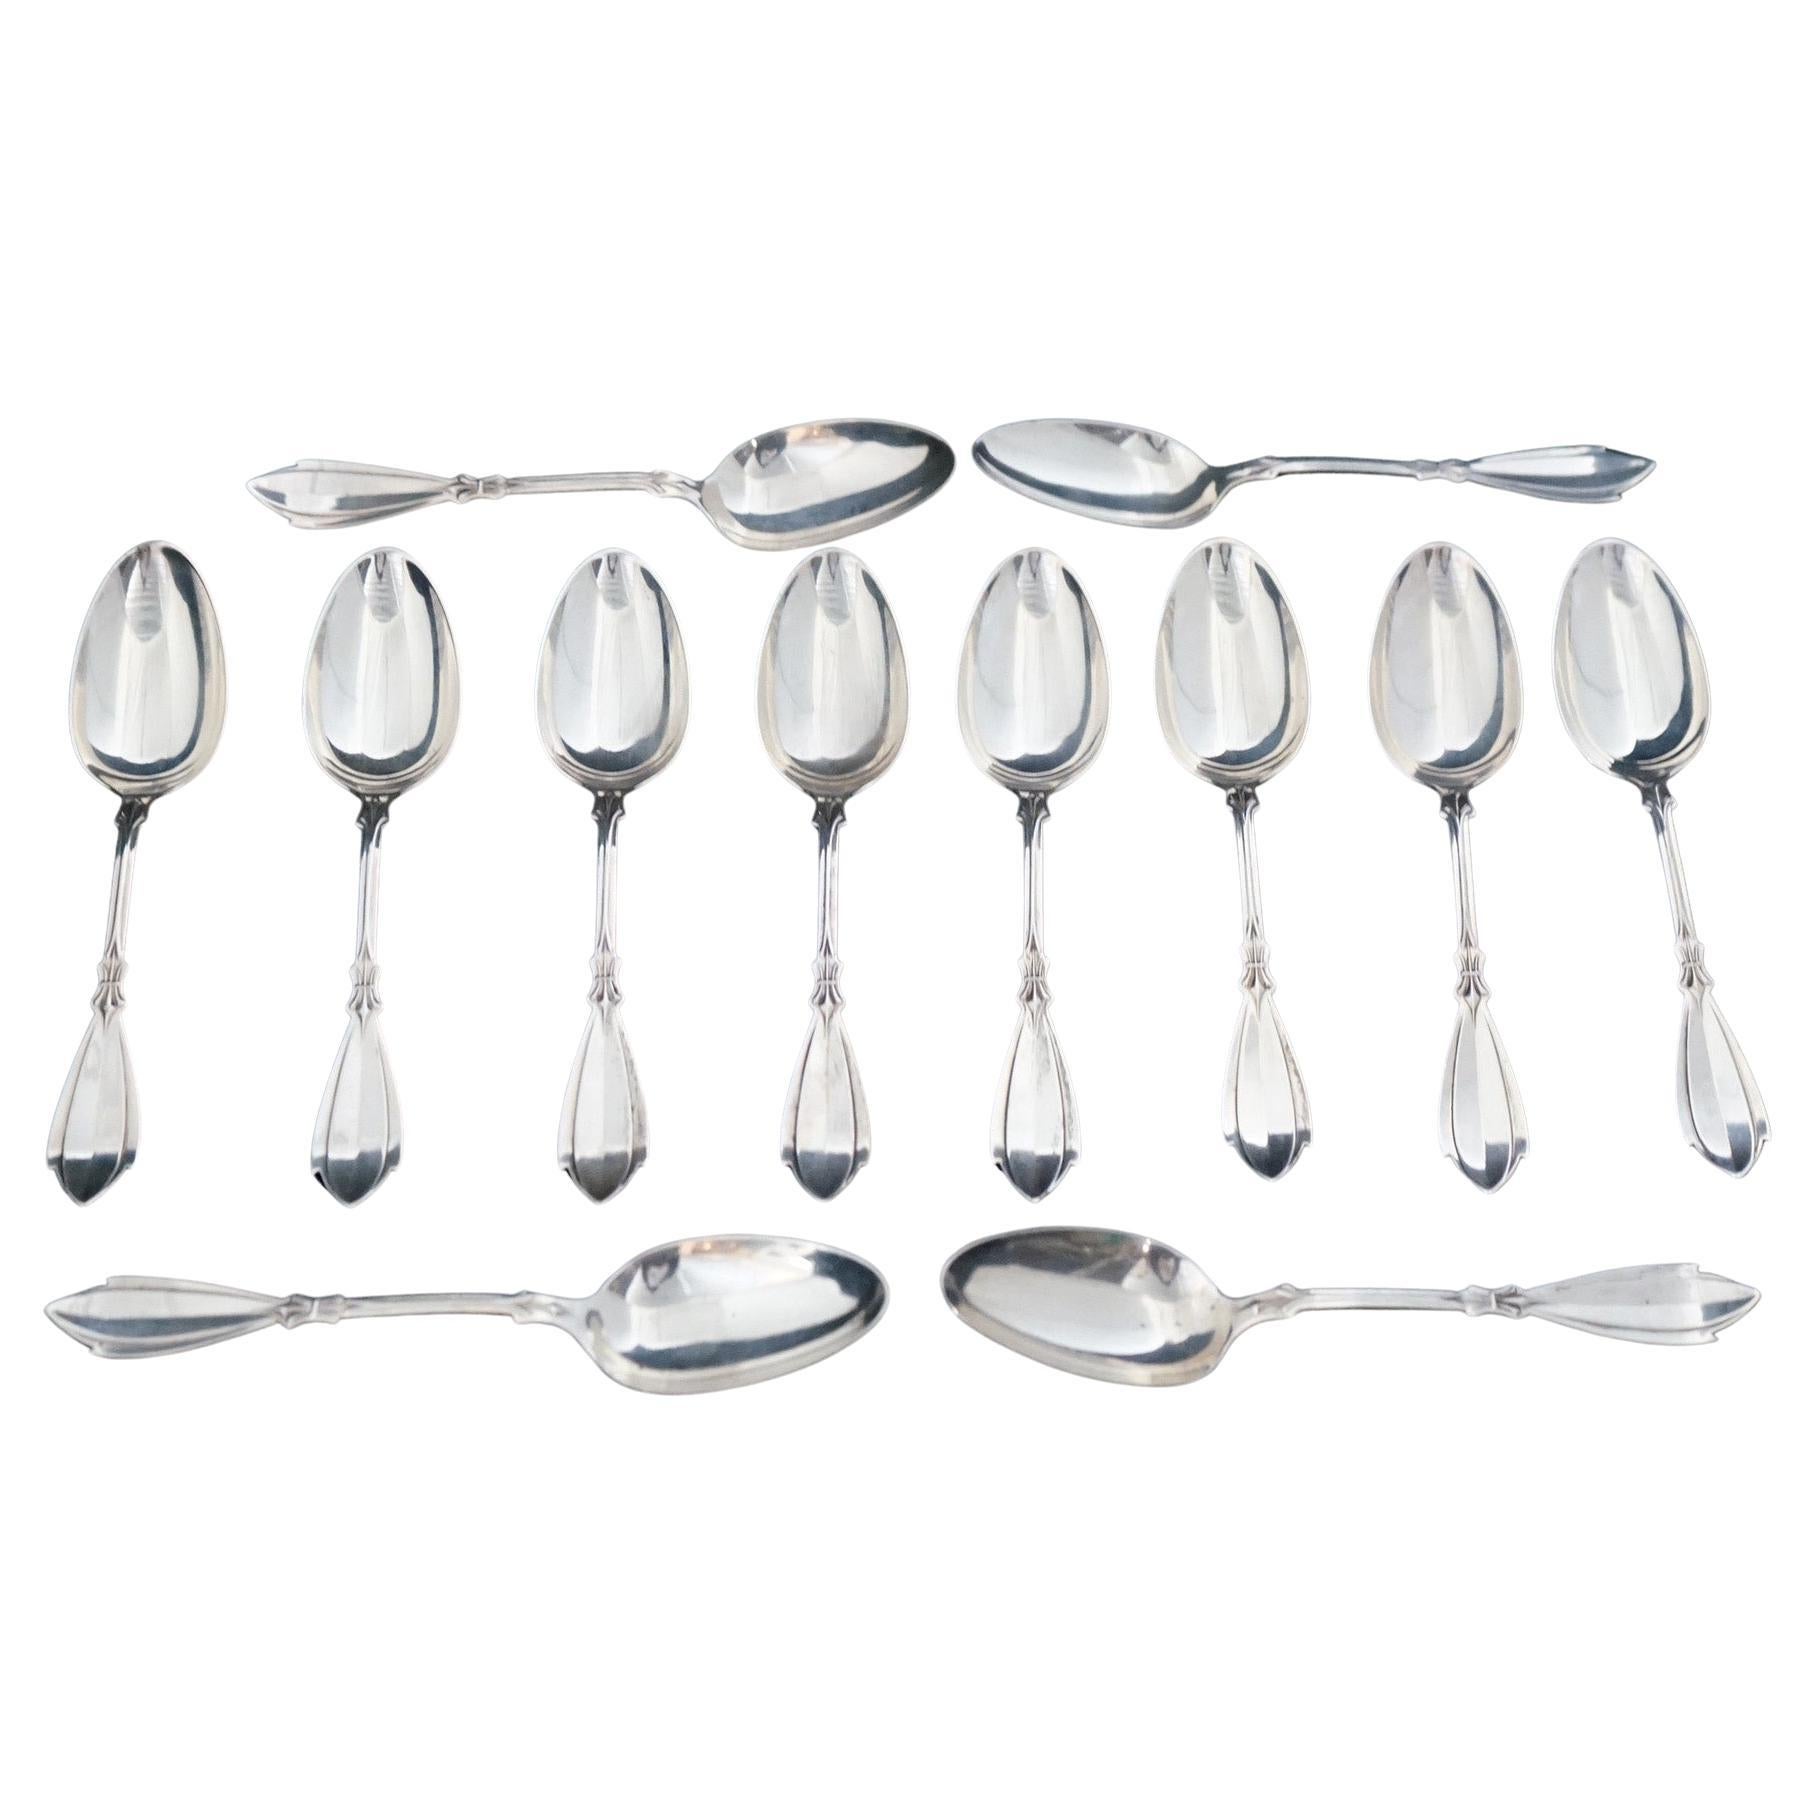 Antique Set of 12 Silver Tablespoons by Albert Coles C1850, 22.4 TOZ